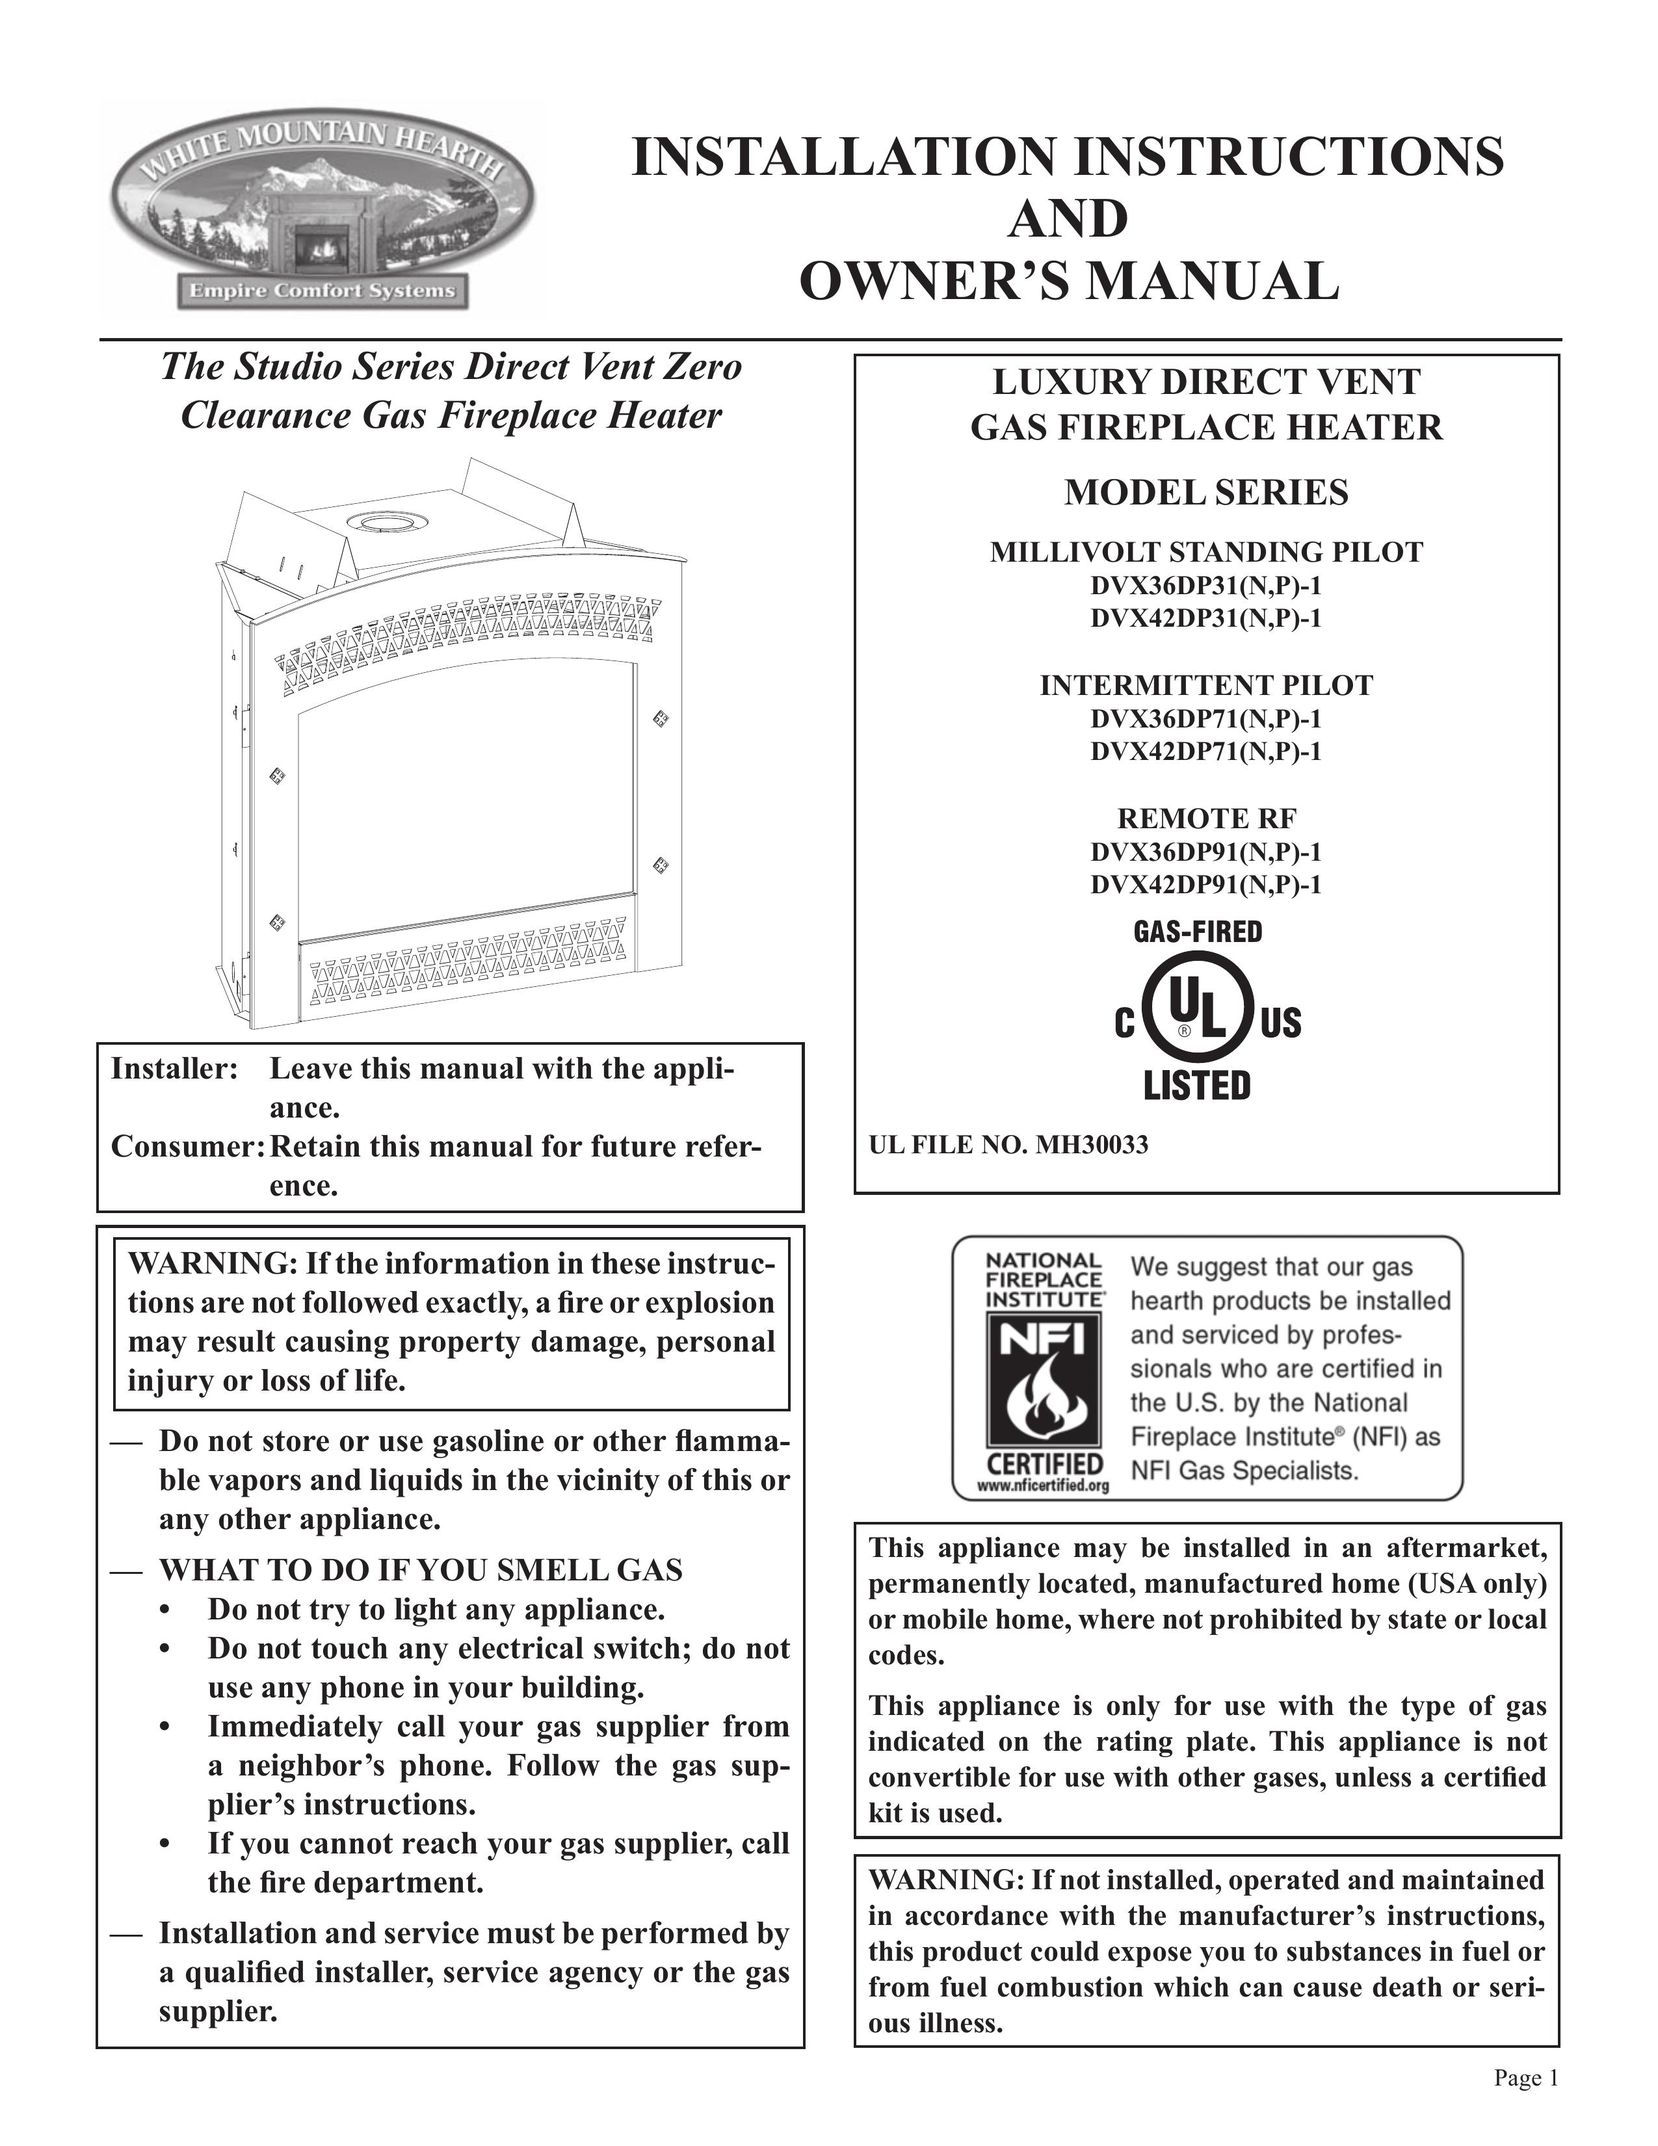 Empire Comfort Systems DVX42DP71(N,P)-1 Gas Heater User Manual